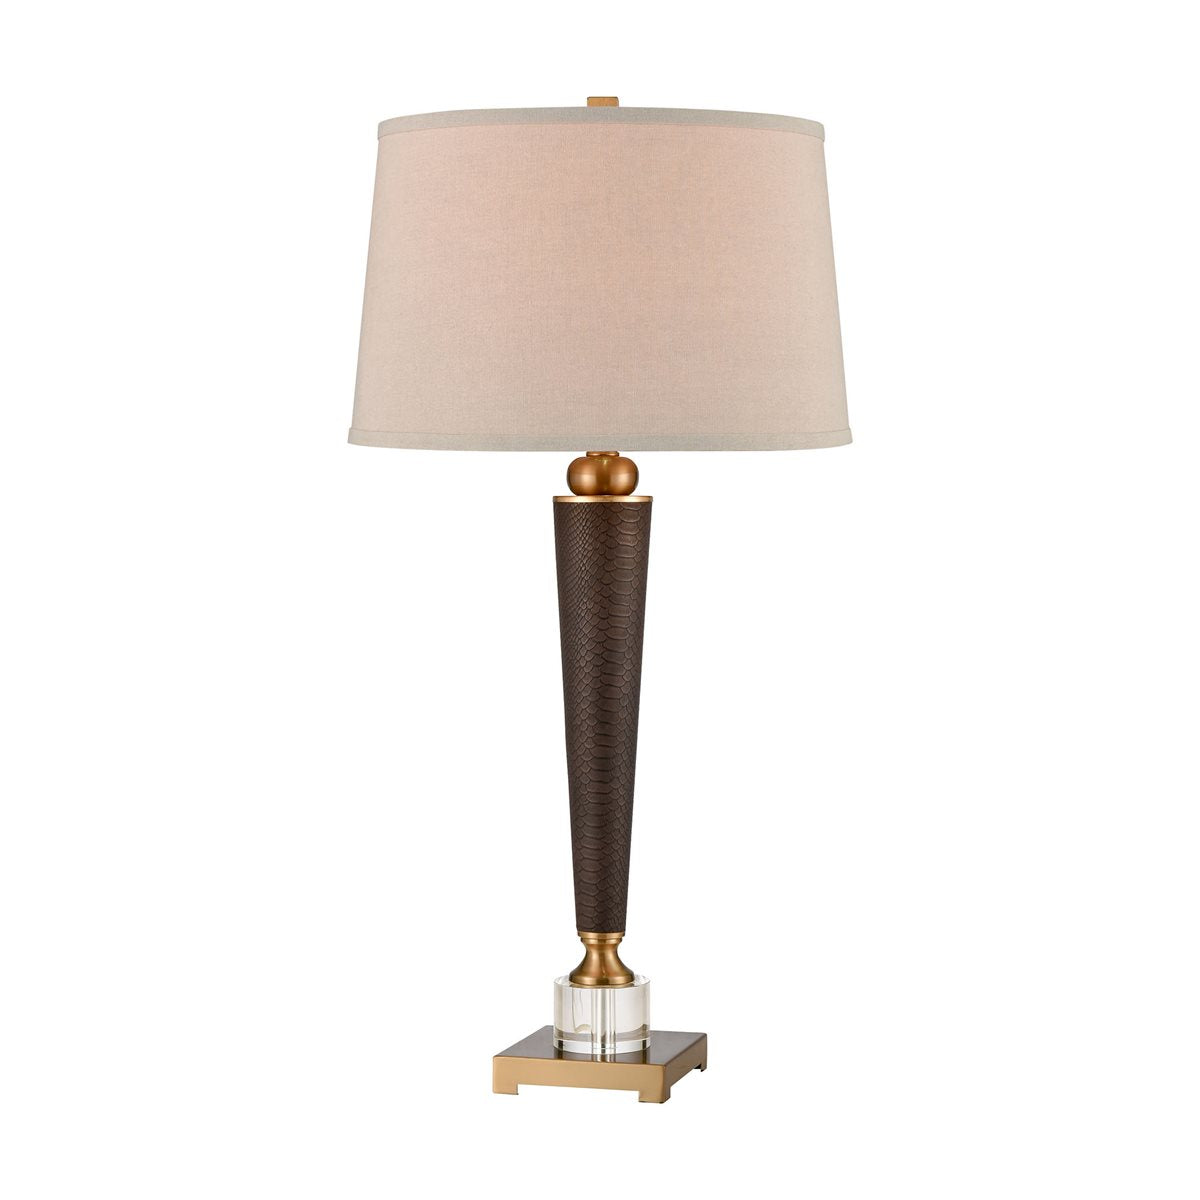 Stein World Ancrame Table Lamp 77206